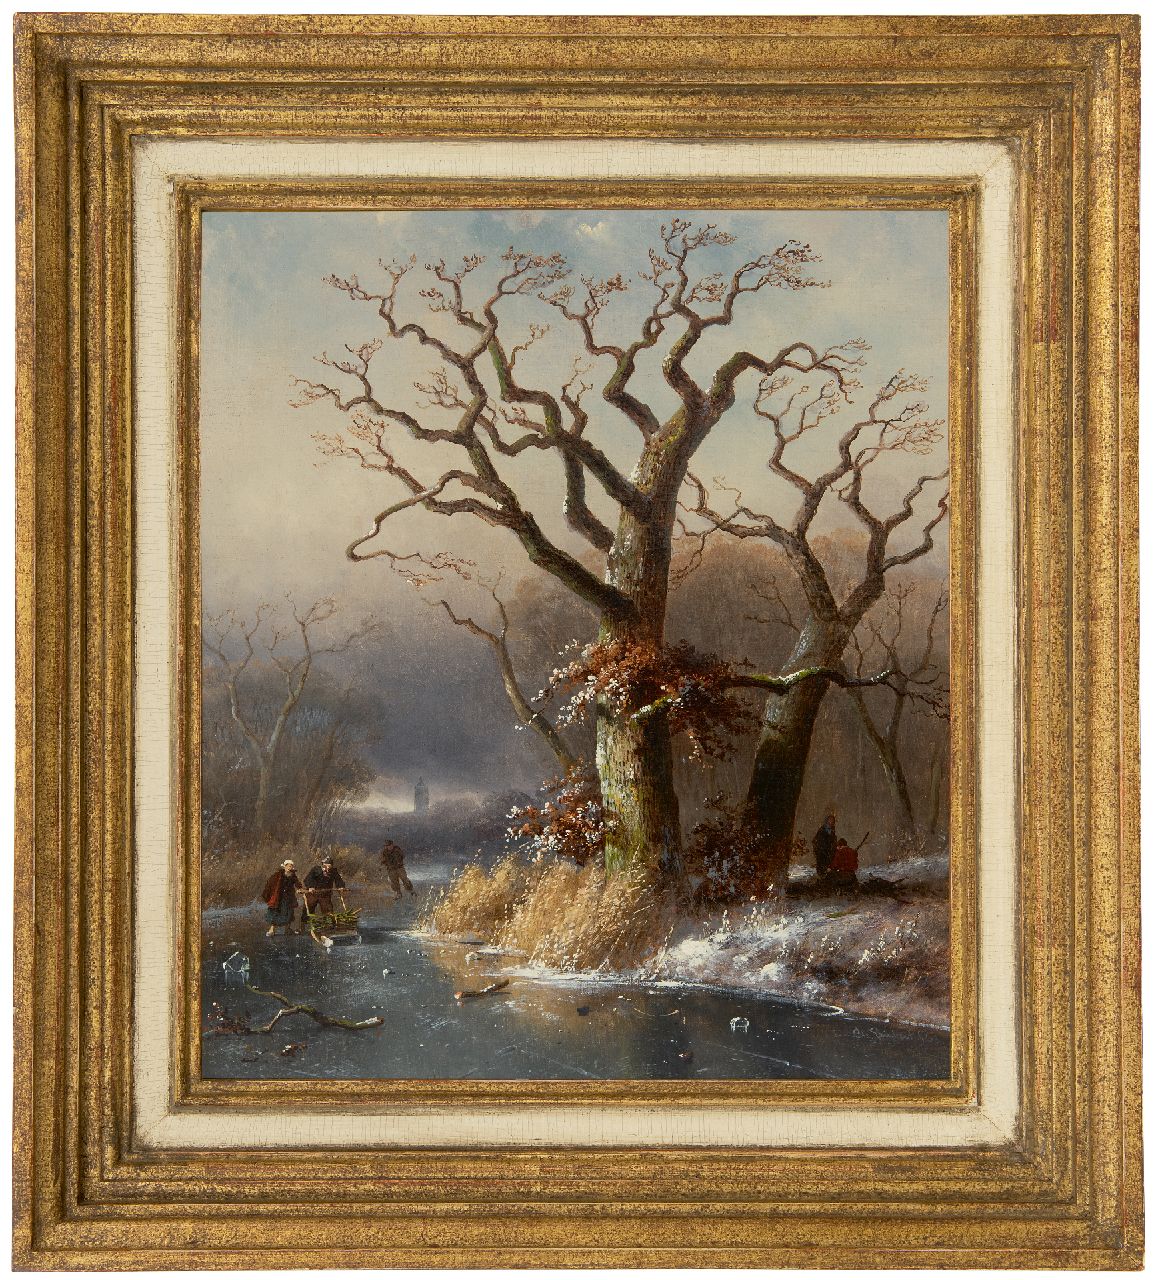 Leickert C.H.J.  | 'Charles' Henri Joseph Leickert | Paintings offered for sale | A frozen landscape with wood gatherers, oil on canvas 40.2 x 35.0 cm, signed l.r. and dated '63